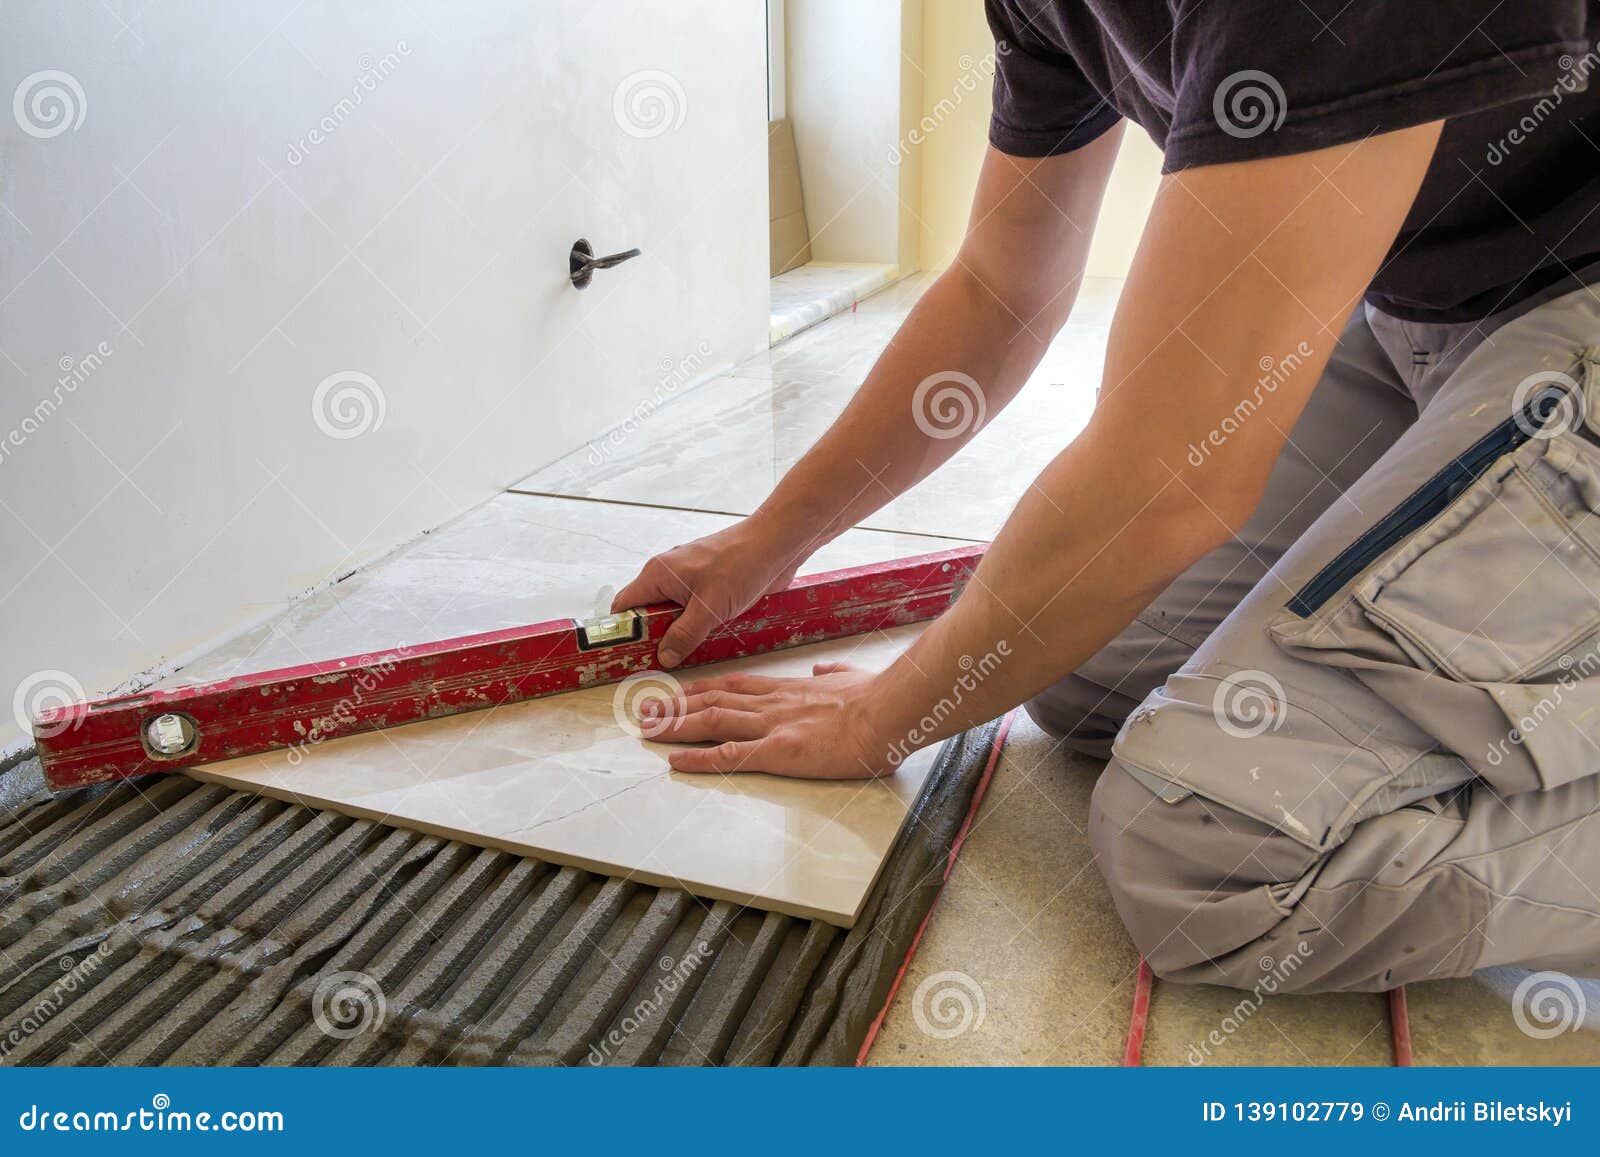 Young Worker Tiler Installing Ceramic Tiles Using Lever On Cement